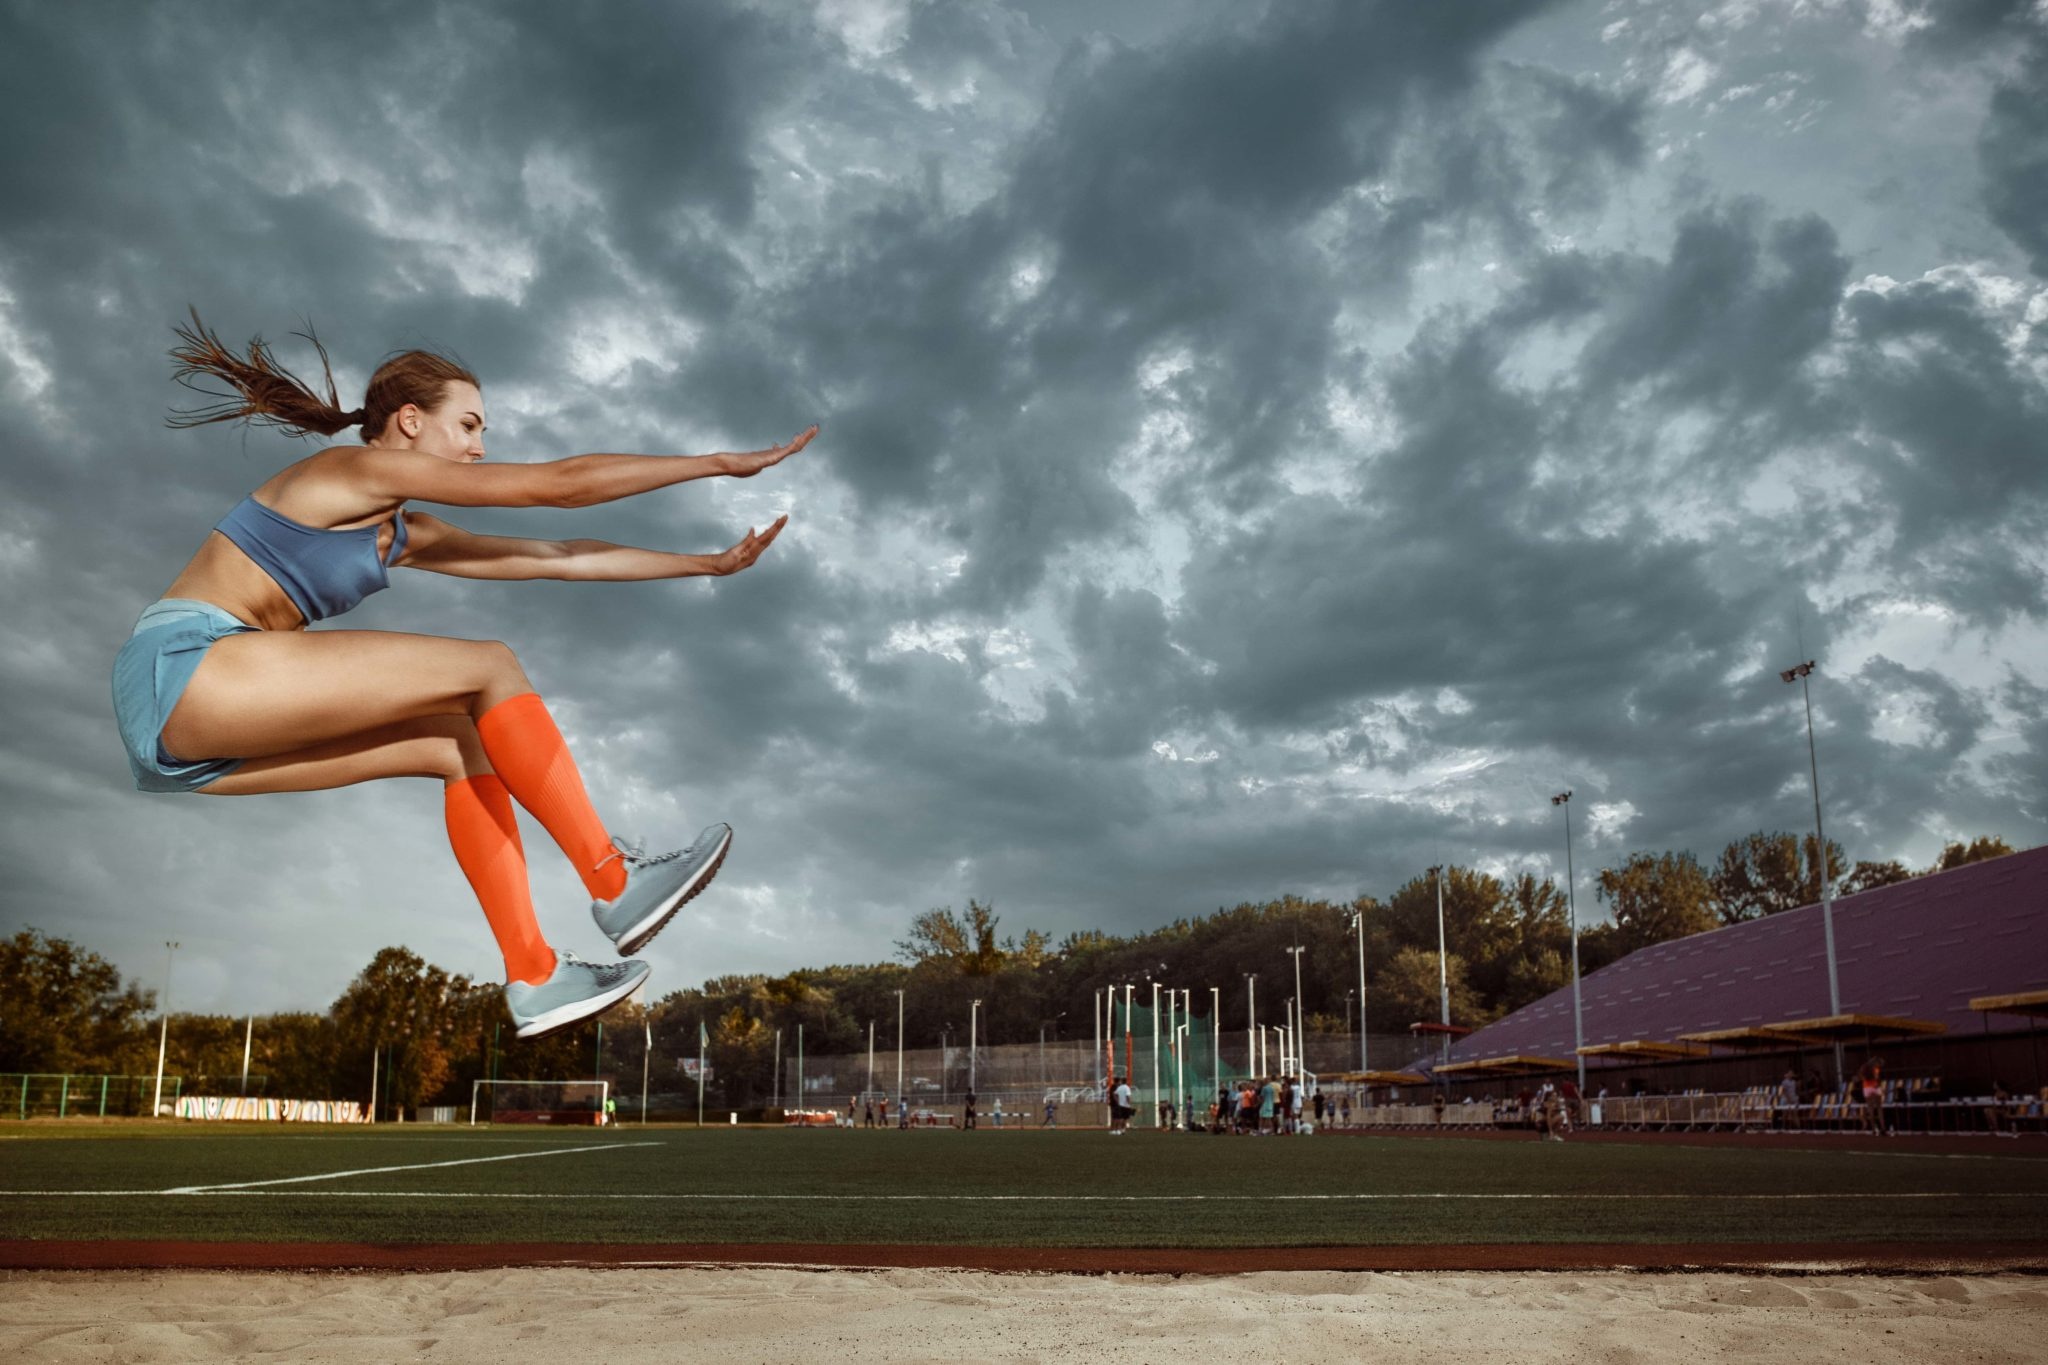 Long Jump: Sports, An athletic event in which competitors jump as far as possible, Sports Jump. 2050x1370 HD Wallpaper.